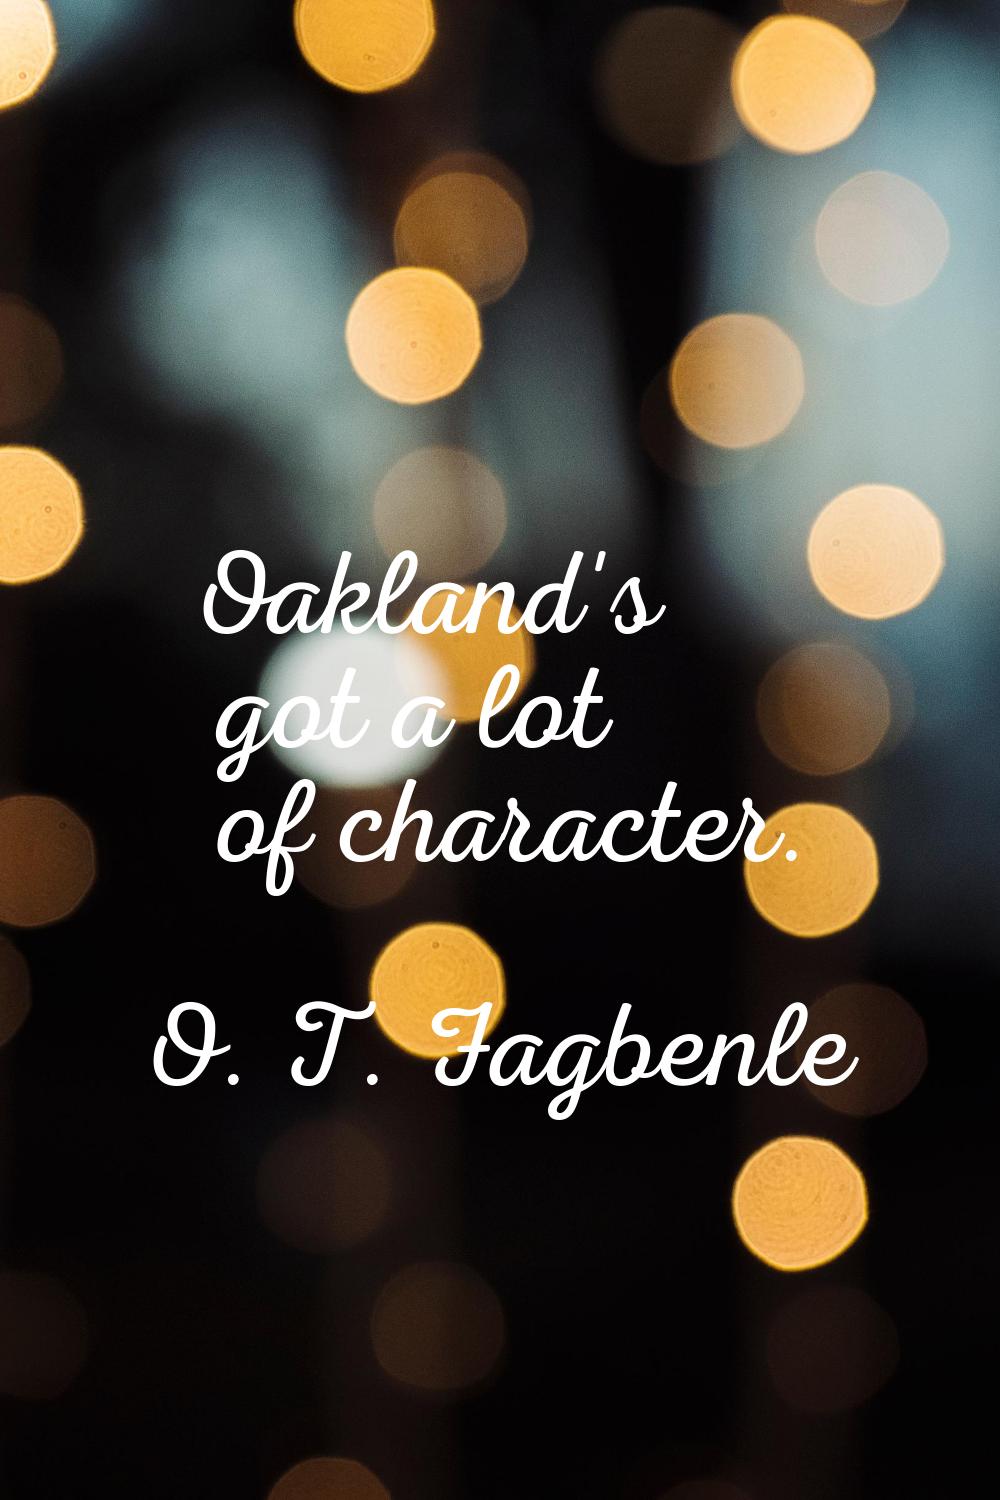 Oakland's got a lot of character.